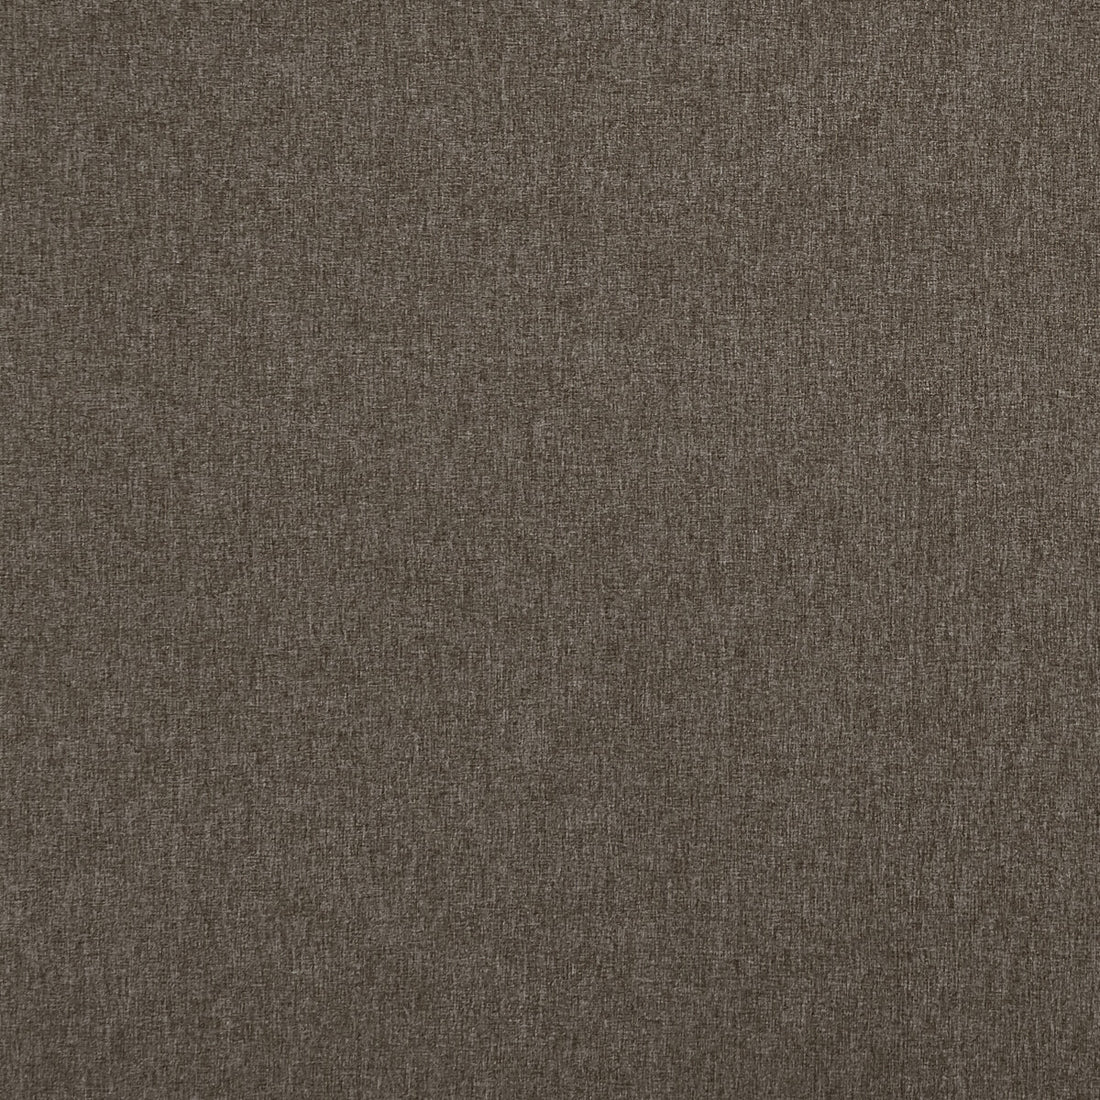 Highlander fabric in chocolate color - pattern F0848/06.CAC.0 - by Clarke And Clarke in the Clarke &amp; Clarke Highlander collection